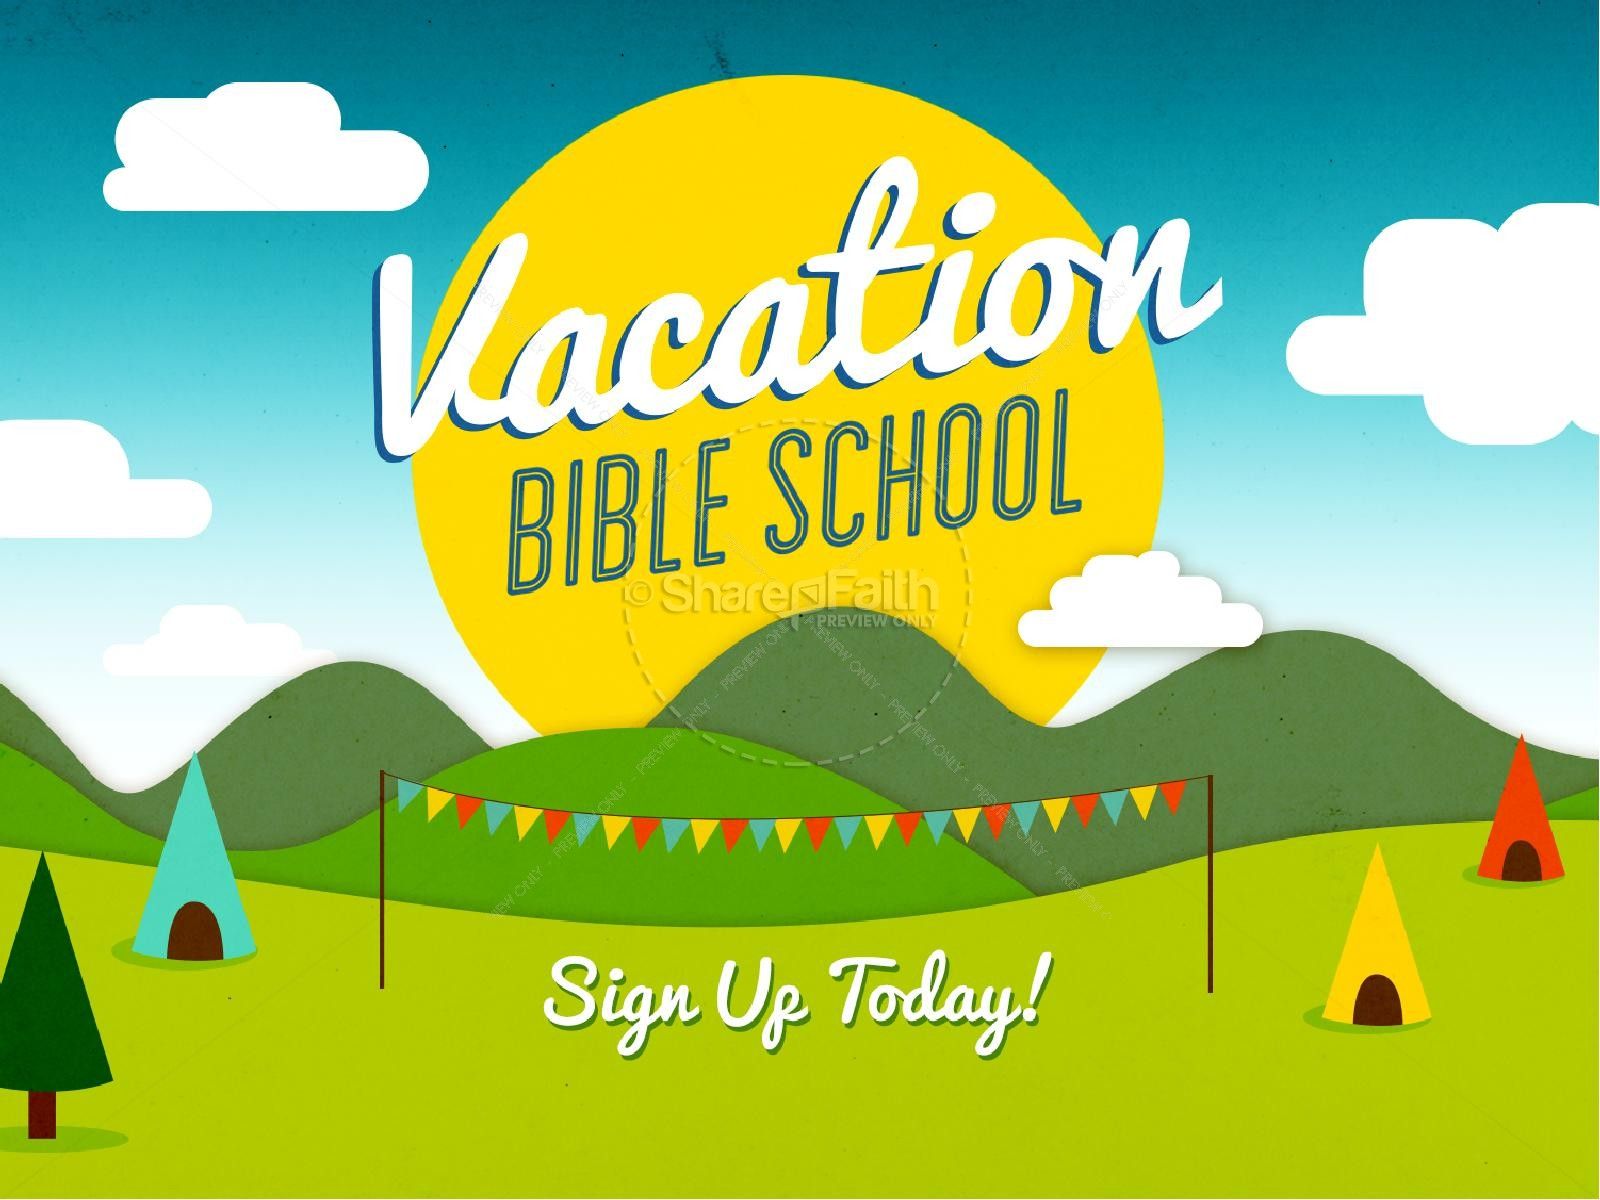 VBS Background. VBS Background